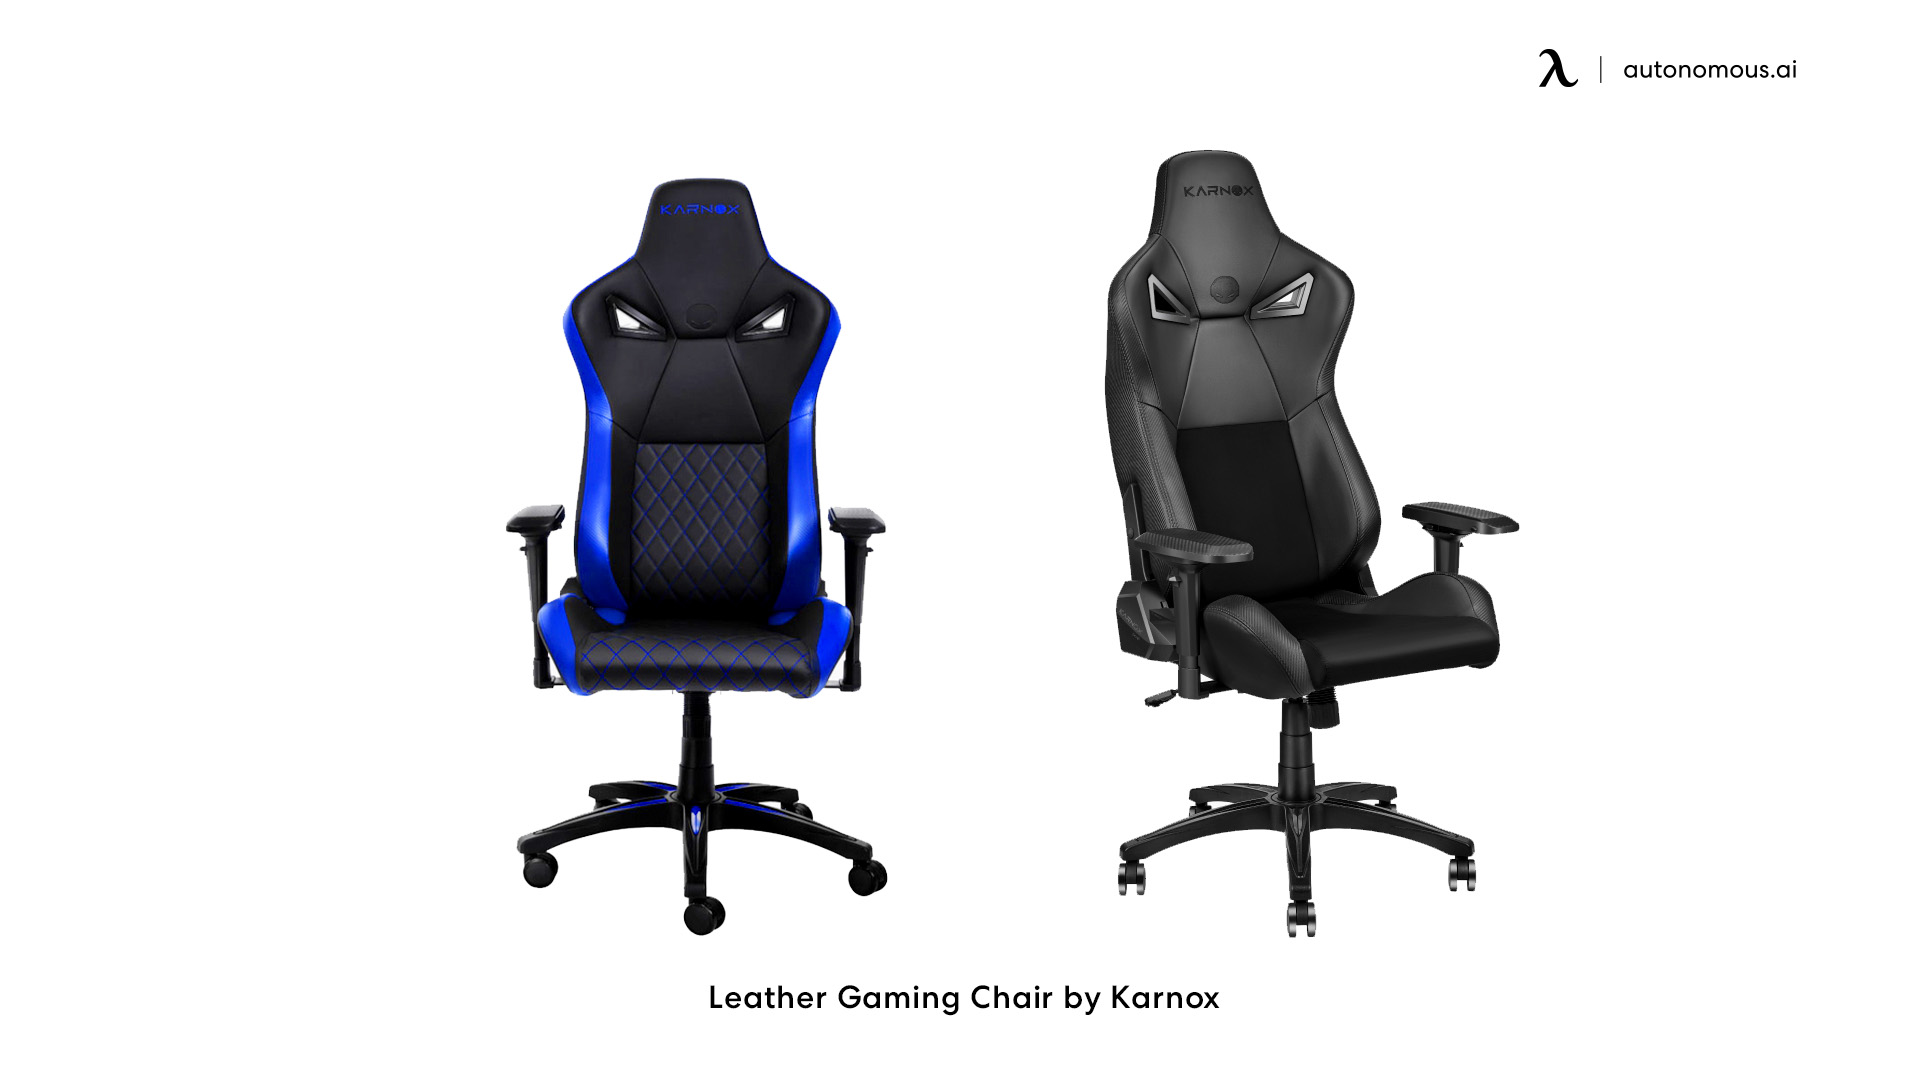 Leather Gaming Chair by Karnox in bedroom gaming setup